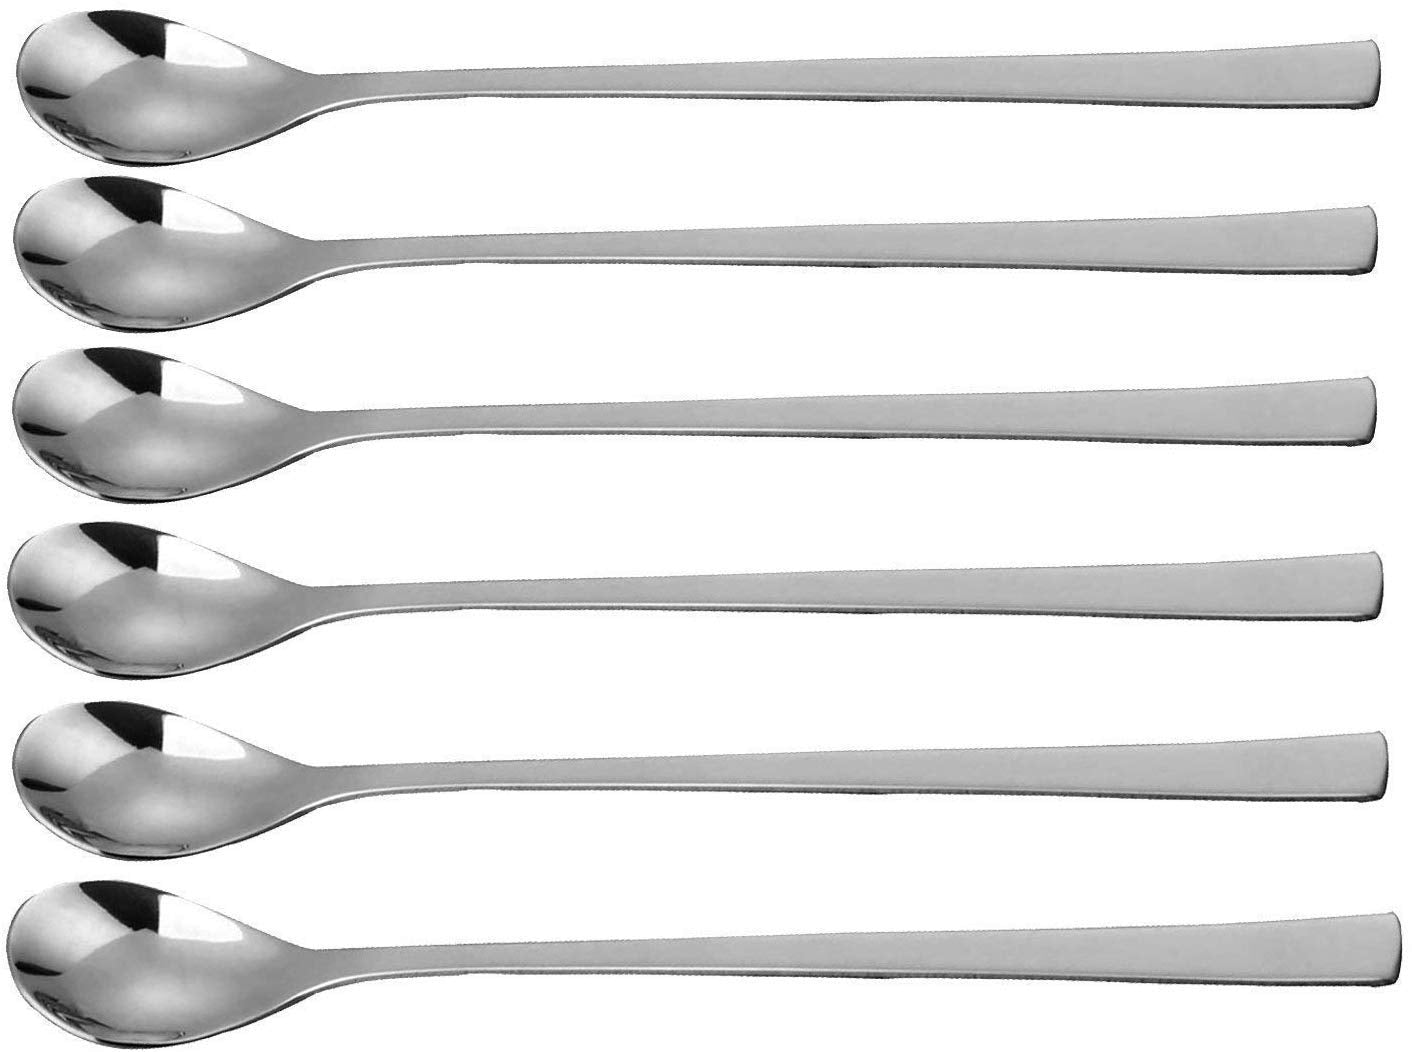 Rudra Exports Extra Long Spoon for Iced Tea, Coffee Ice Cream Spoon for Tall Glasses, Cocktail Bar Stainless Steel Spoon  Milkshake Spoon: 12 Pcs Set